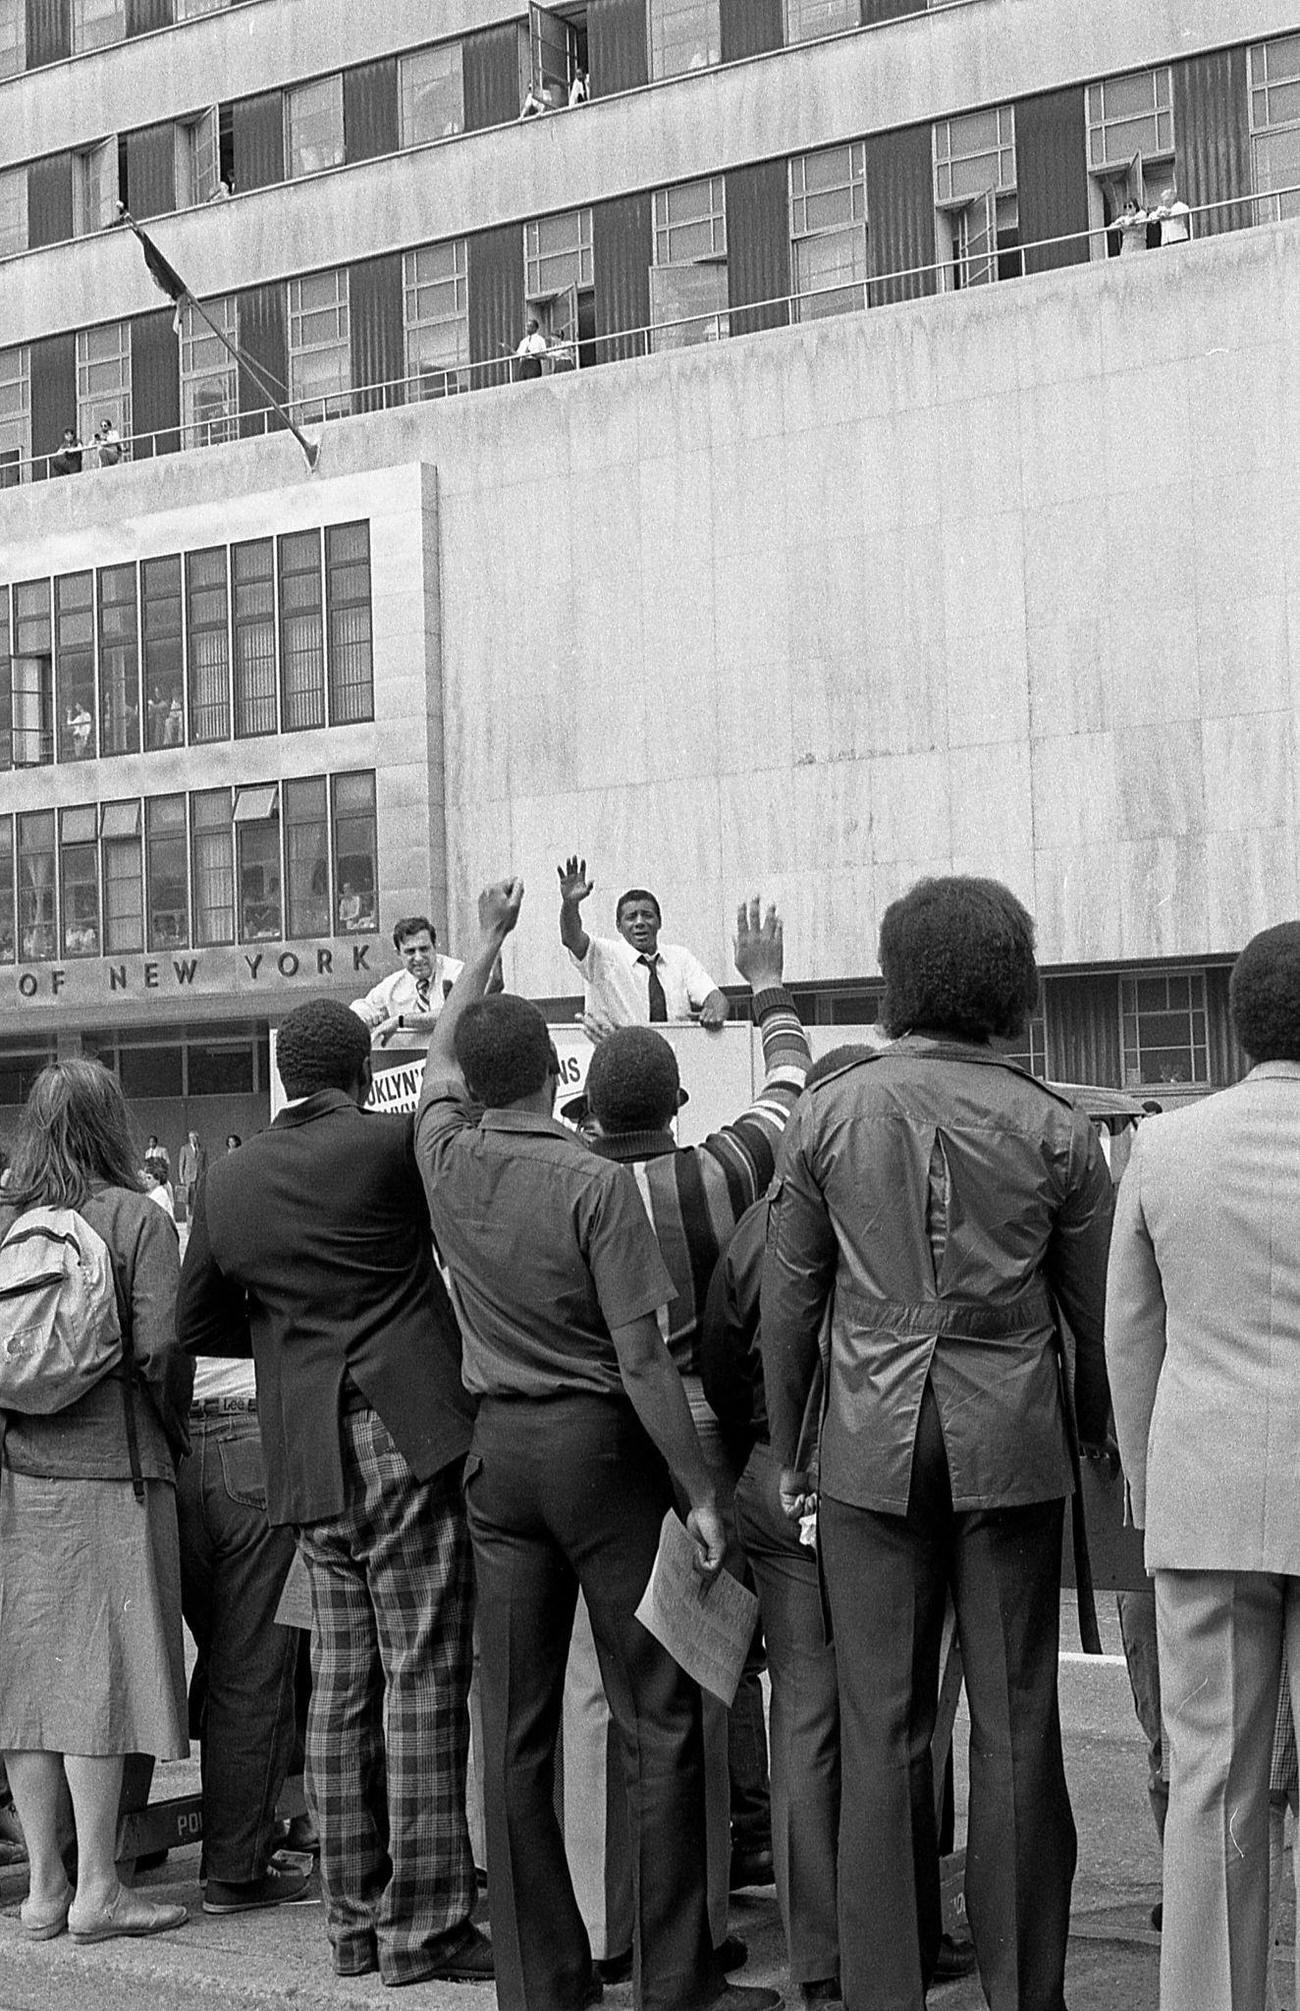 Floyd Patterson Waves From New York Daily News Truck, Brooklyn, 1983